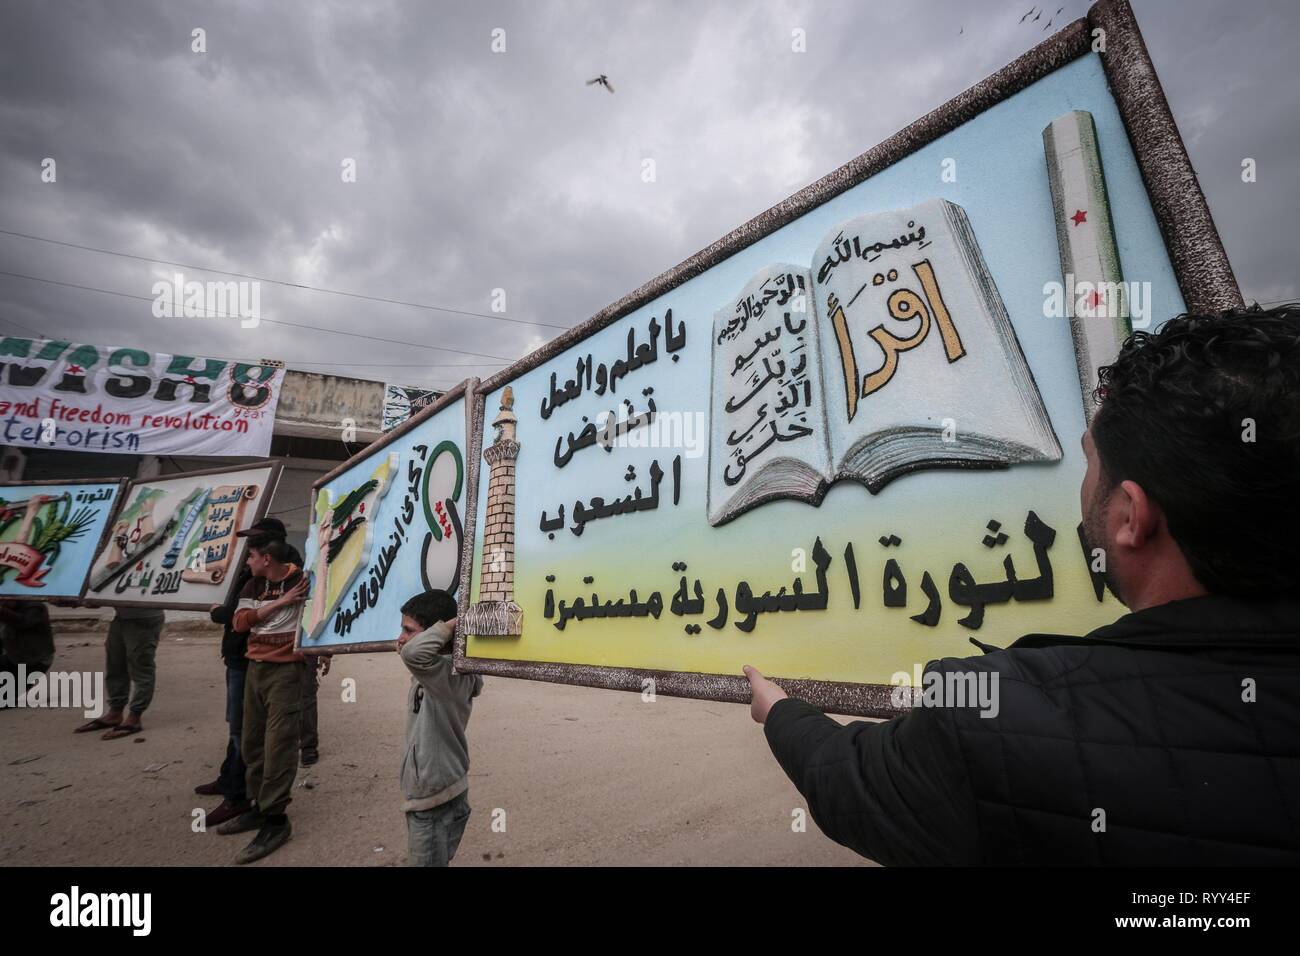 Syrians are seen holding banners during the celebration. Syrians in the town of Bensh, which lies east of Idlib and controlled by the opposition, celebrated the eighth anniversary of the uprising against the rule of President Bashar al-Assad. Stock Photo